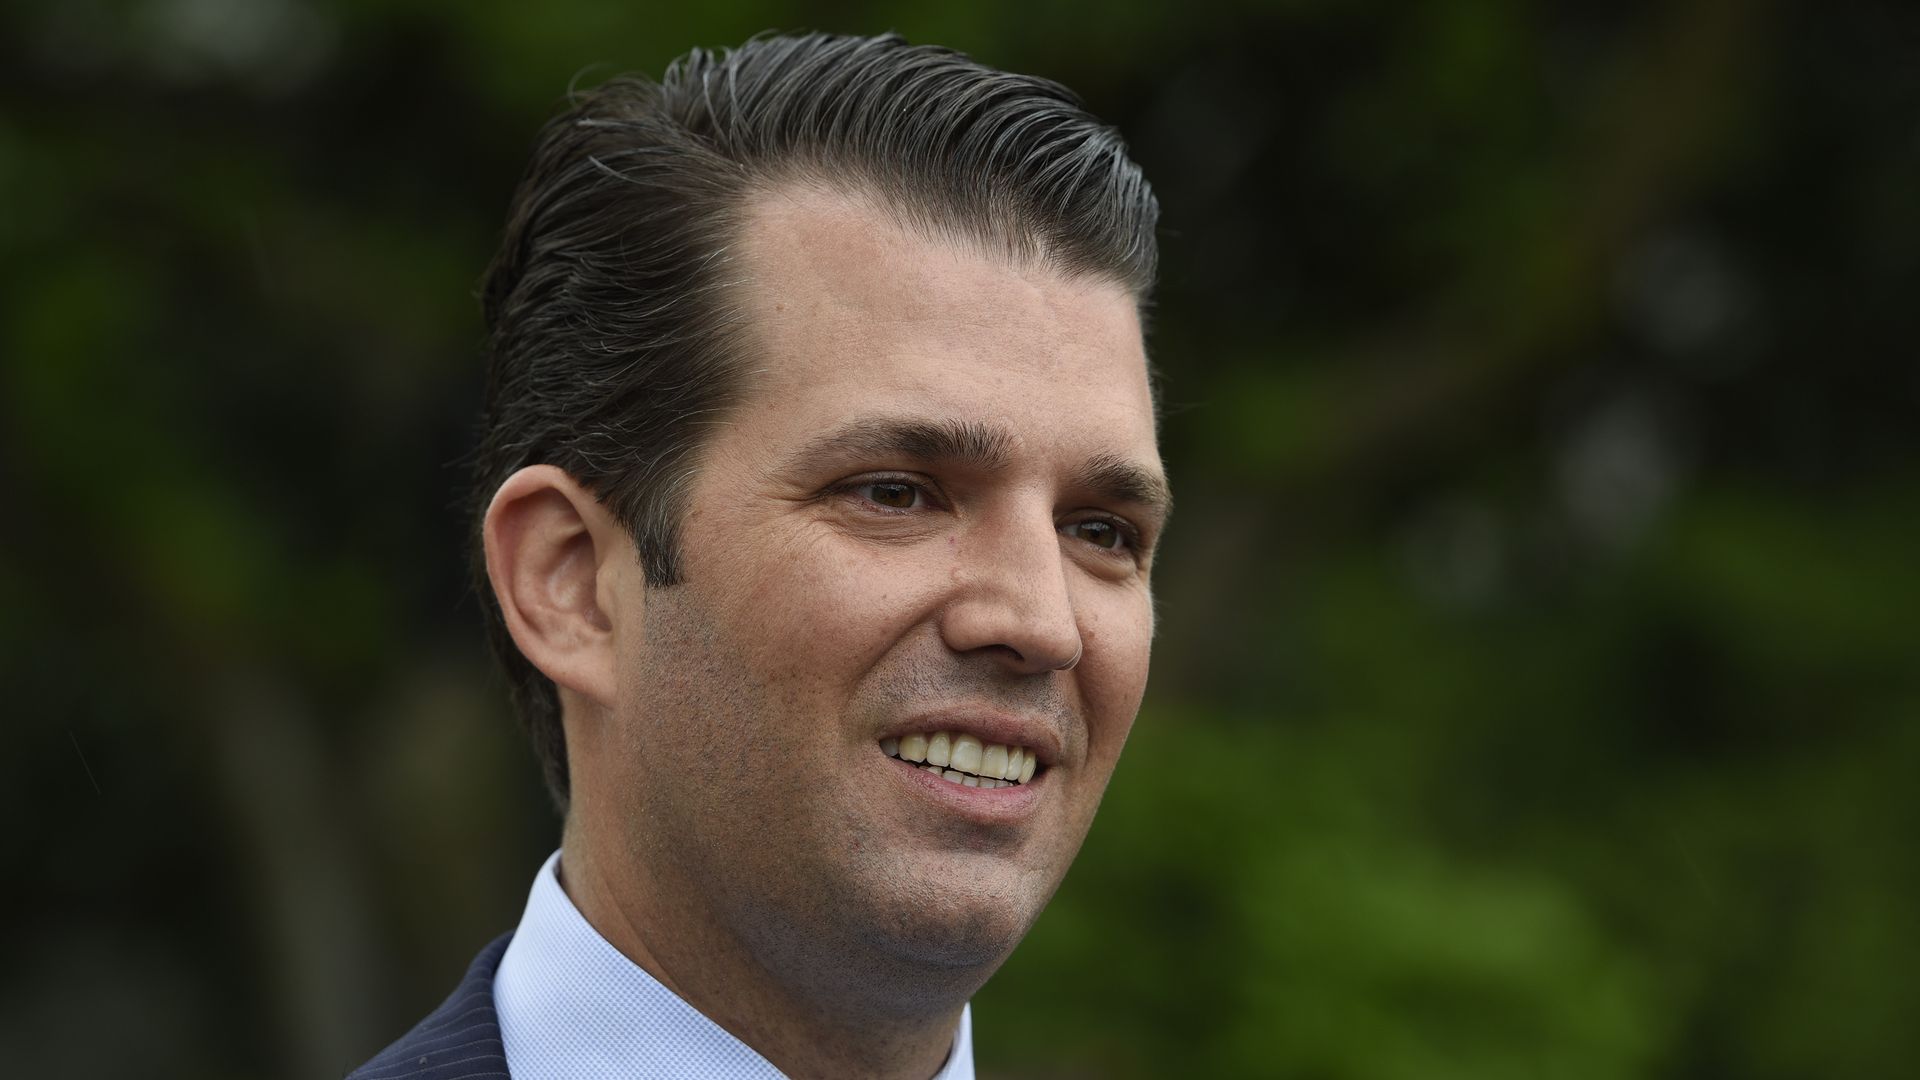 Donald Trump Jr. won't rule out running for office.